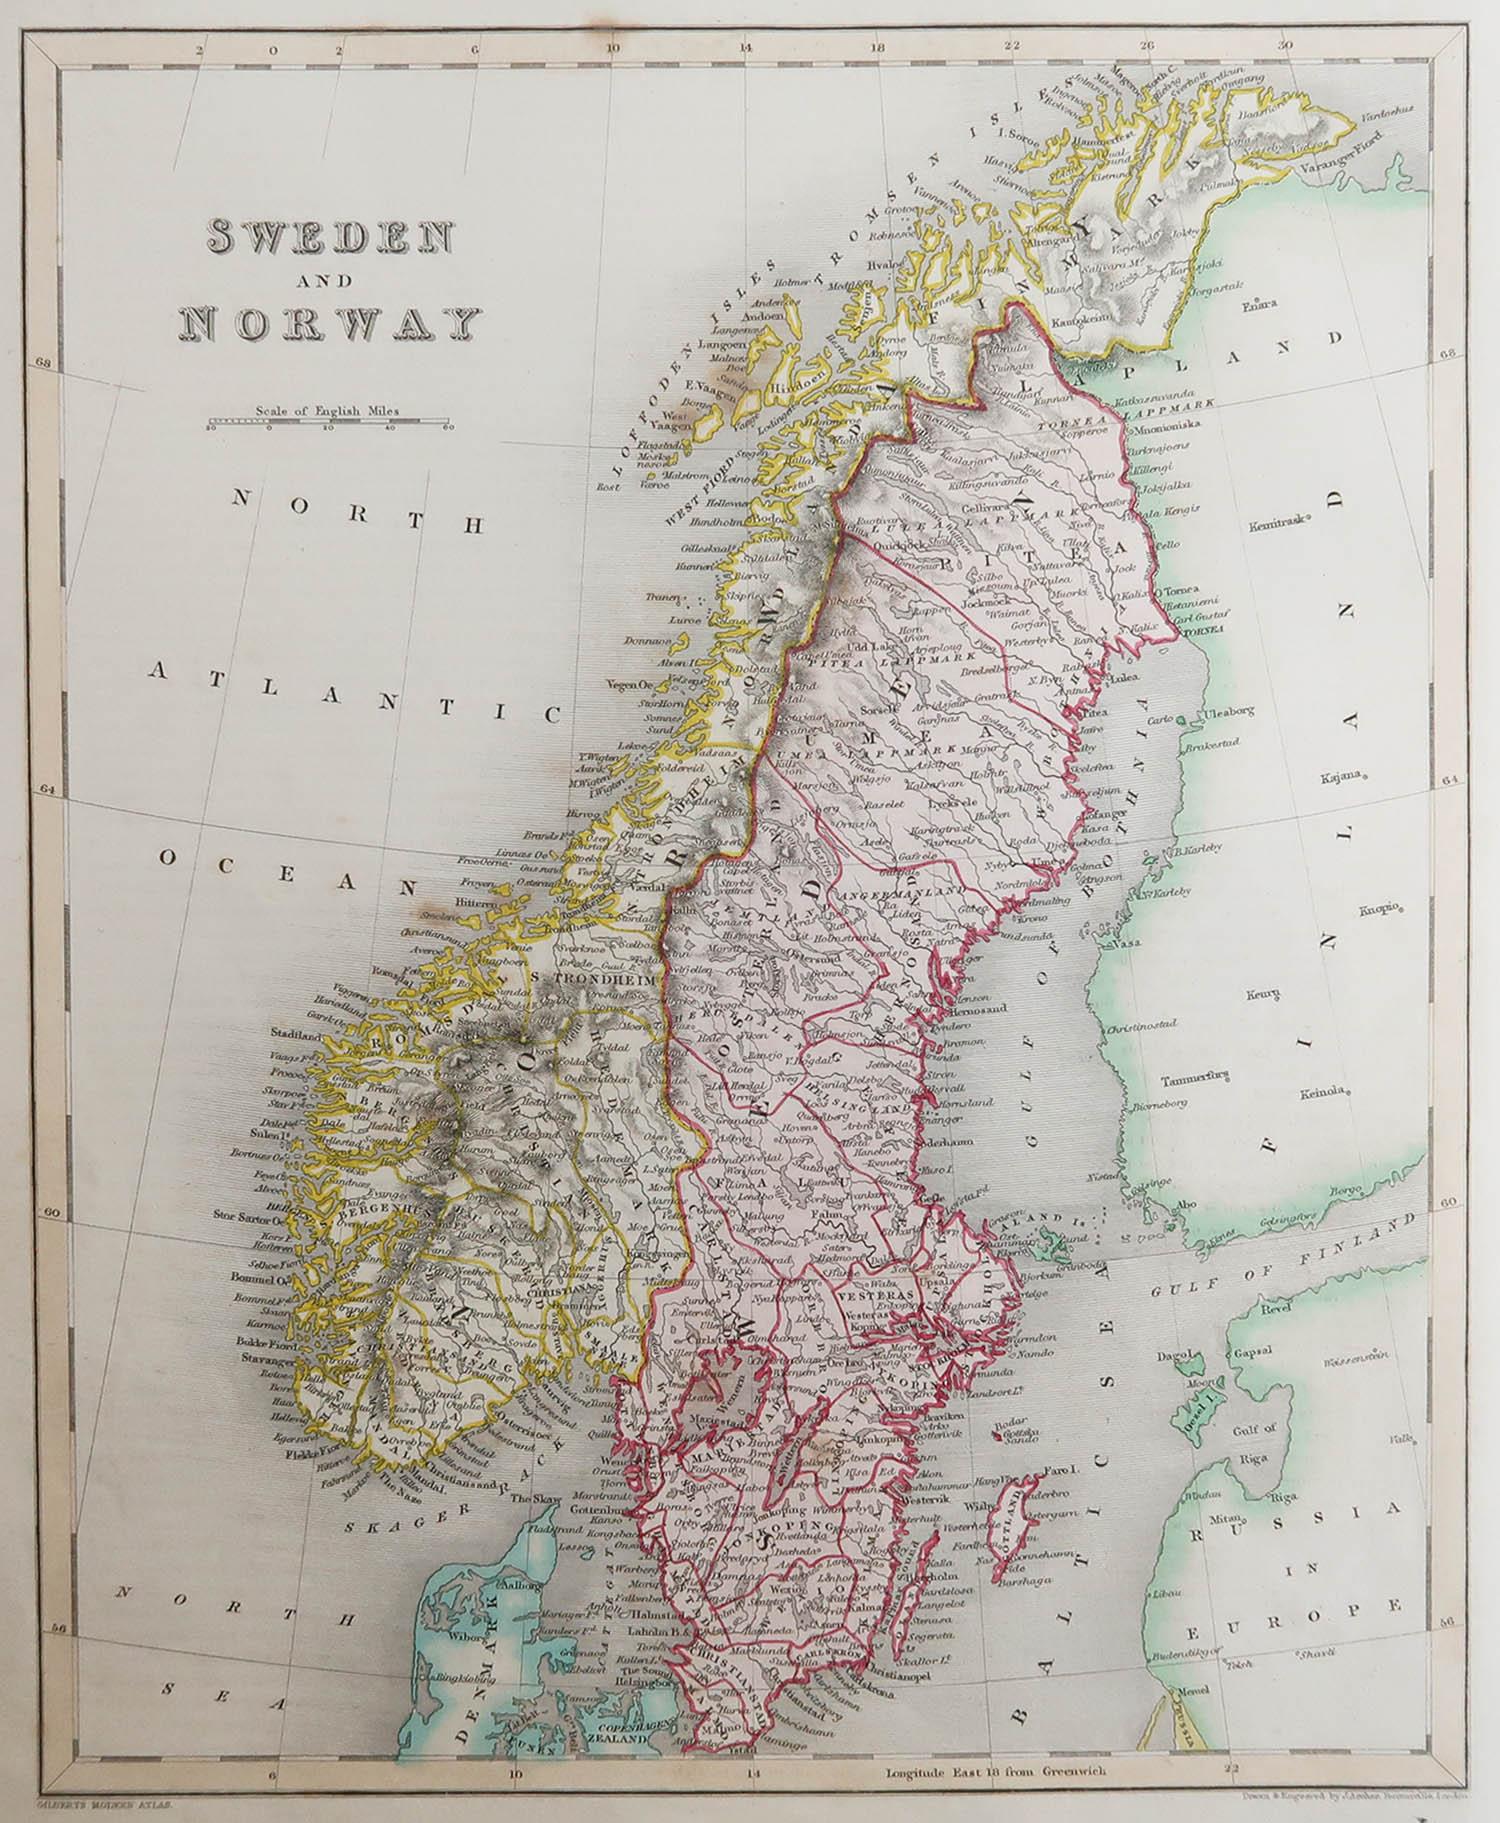 Great map of Sweden and Norway

Drawn and engraved by Archer

Published by Grattan and Gilbert

Original color 

Unframed.




